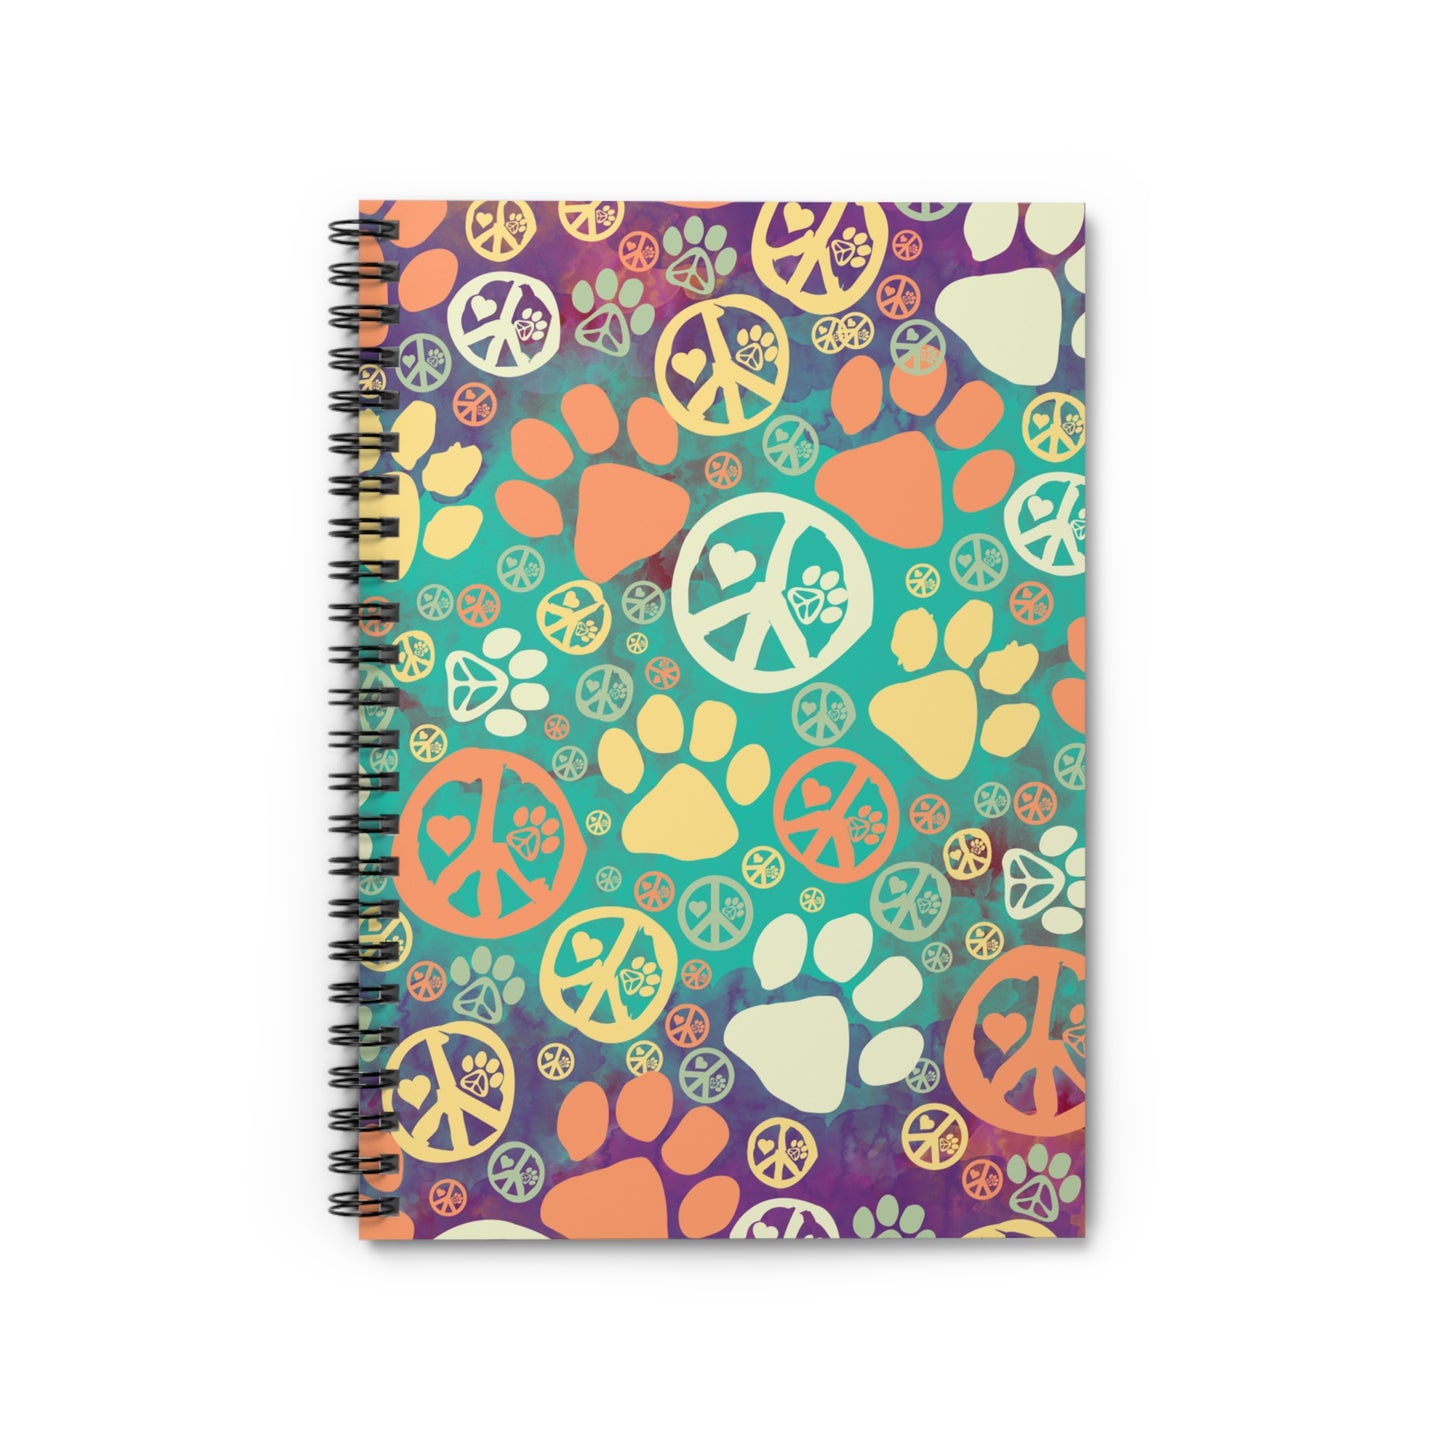 Peace Love Paws - Spiral Notebook - Ruled Line